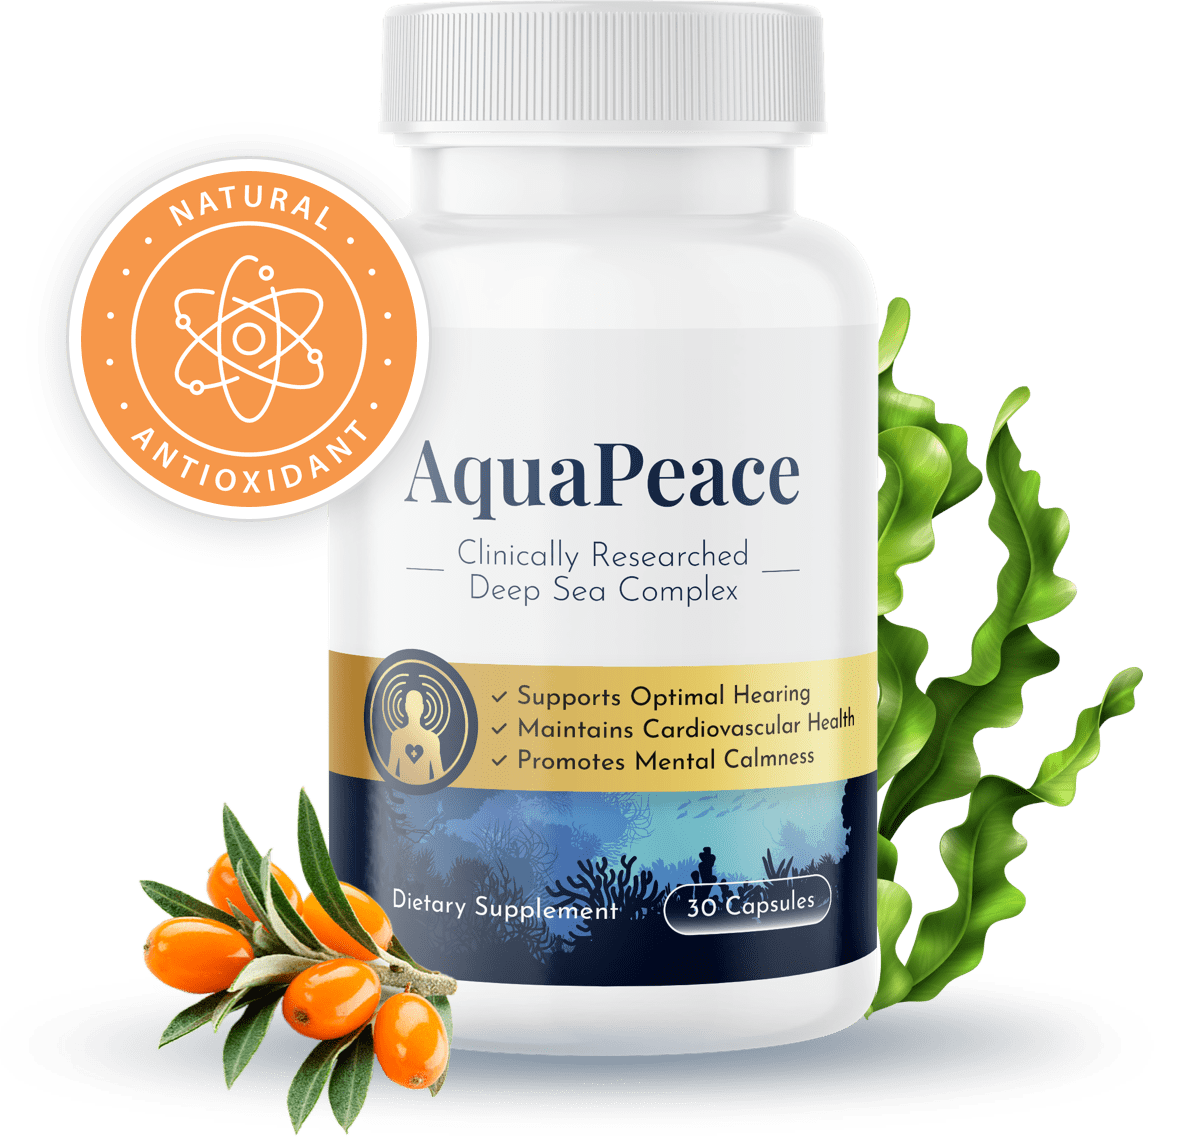 Say goodbye to earaches with AquaPeace's natural formula